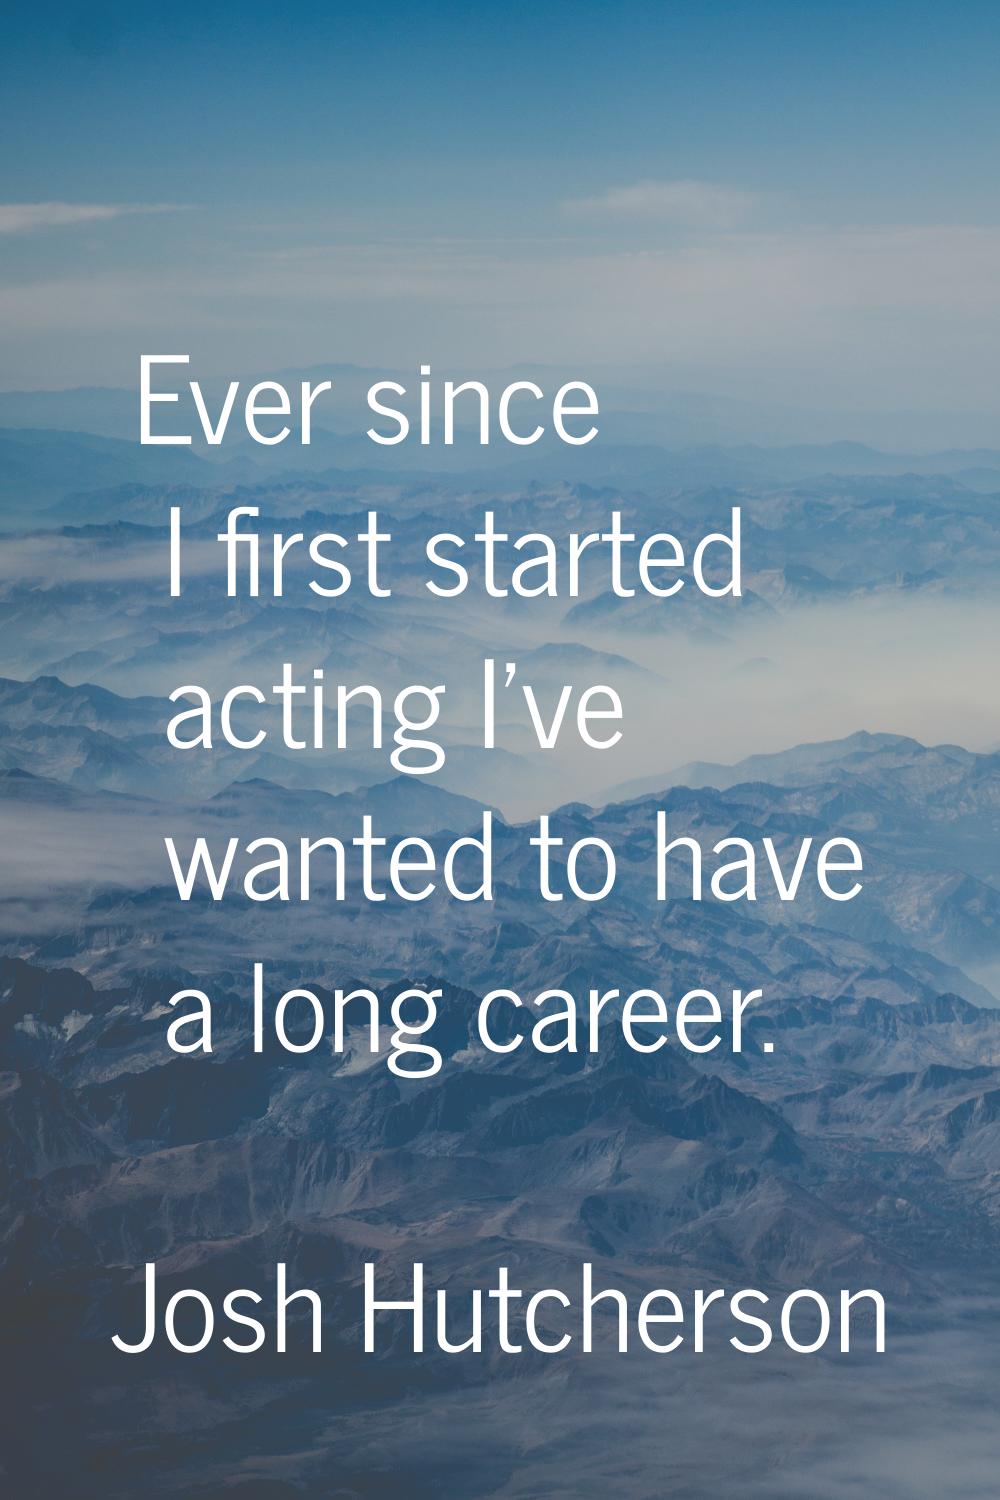 Ever since I first started acting I've wanted to have a long career.